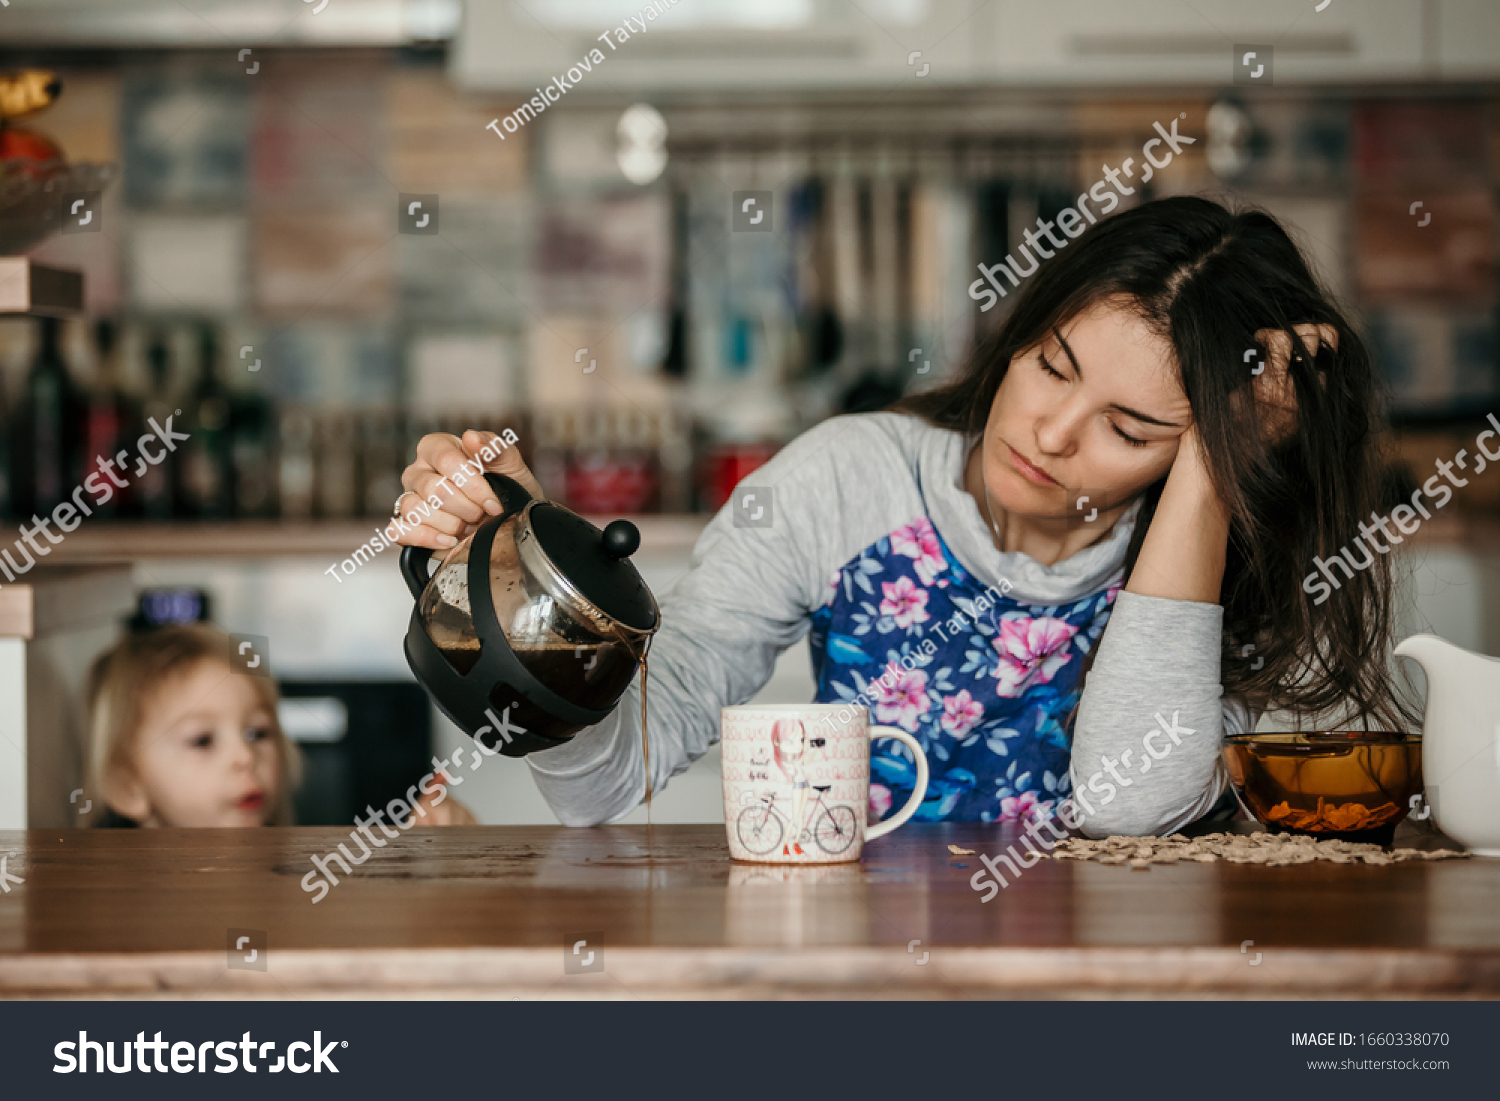 Tired mother, trying to pour coffee in the morning. Woman lying on kitchen table after sleepless night, trying to drink coffee #1660338070